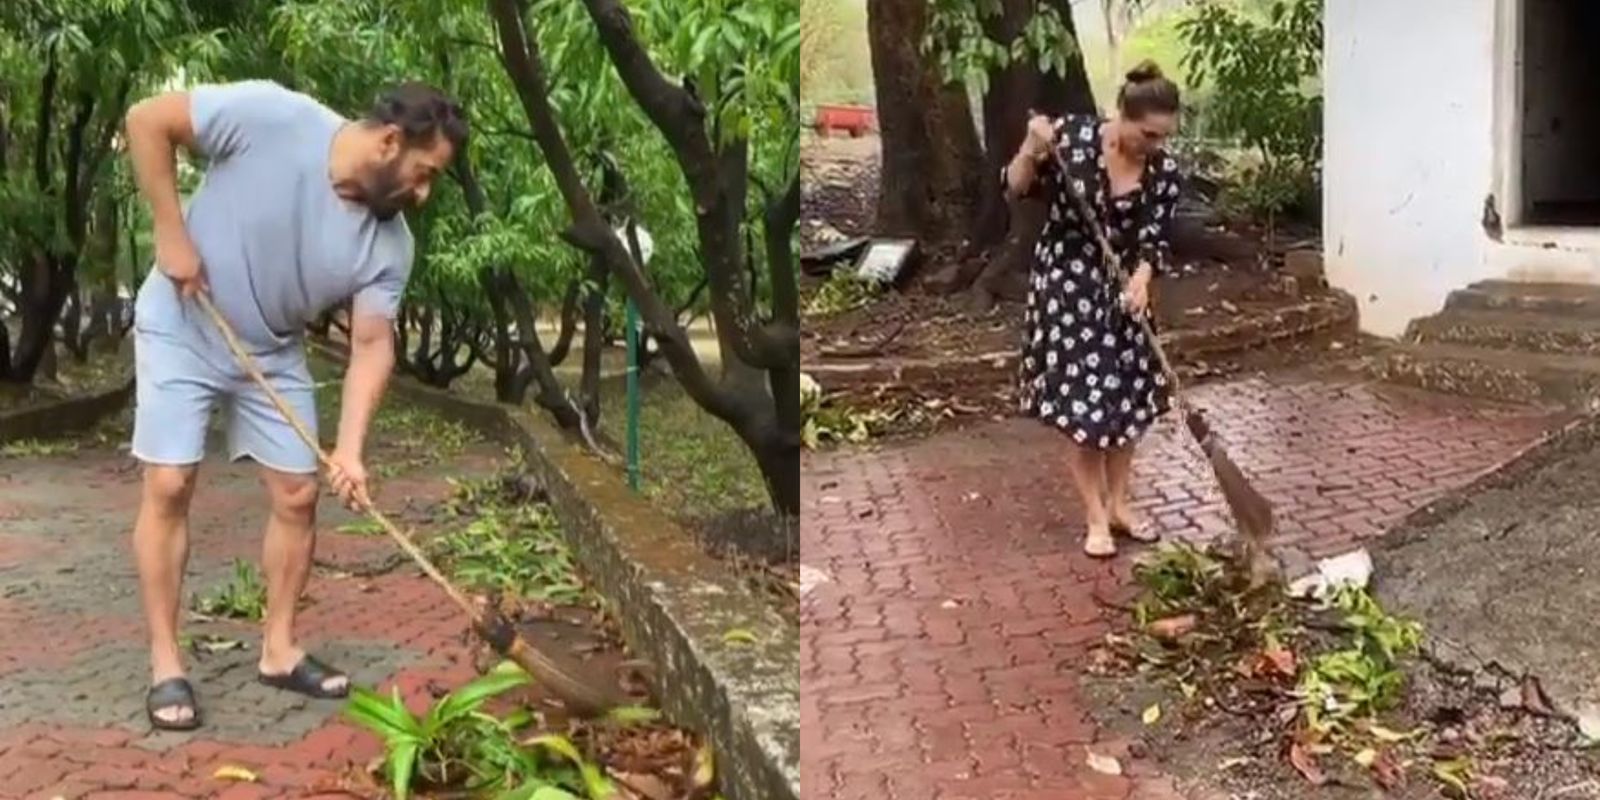 Salman Khan Brooms The Driveway At His Panvel Farmhouse After A Rain Shower On World Environment Day; Watch